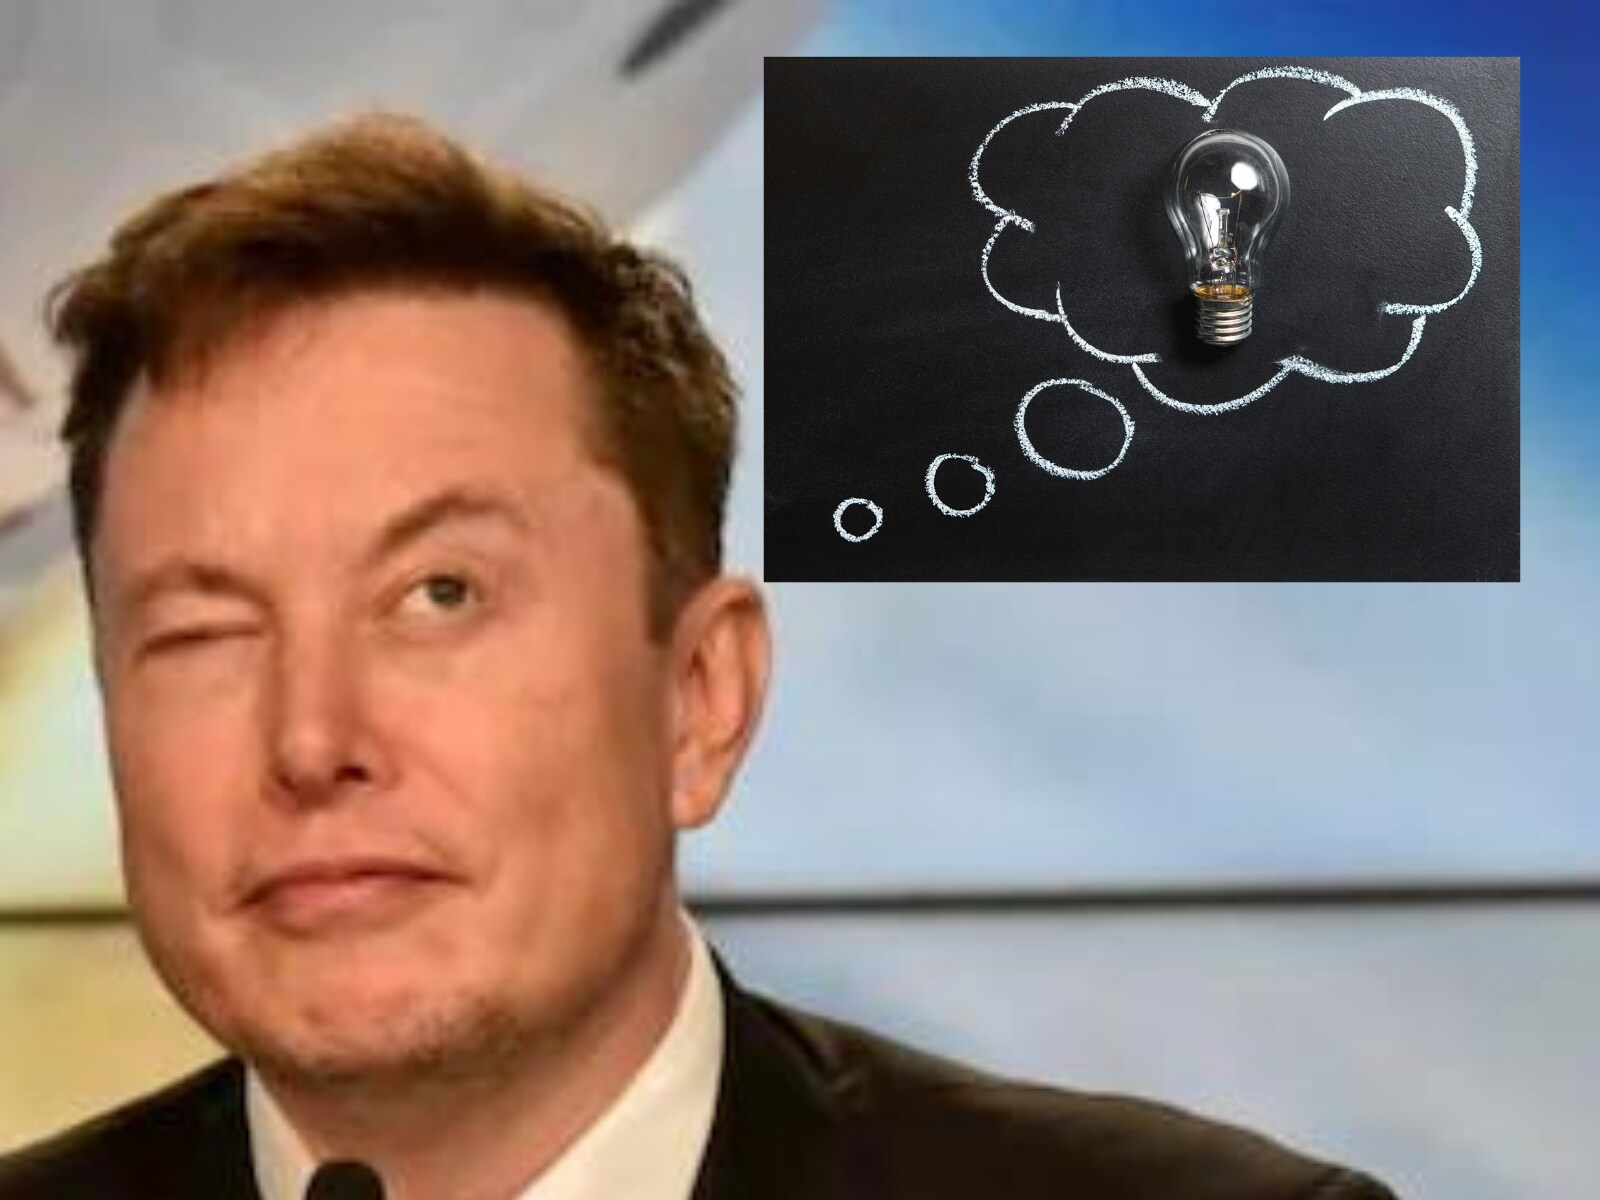 Elon Musk Launches Neuralink to Connect Brains With Computers - WSJ